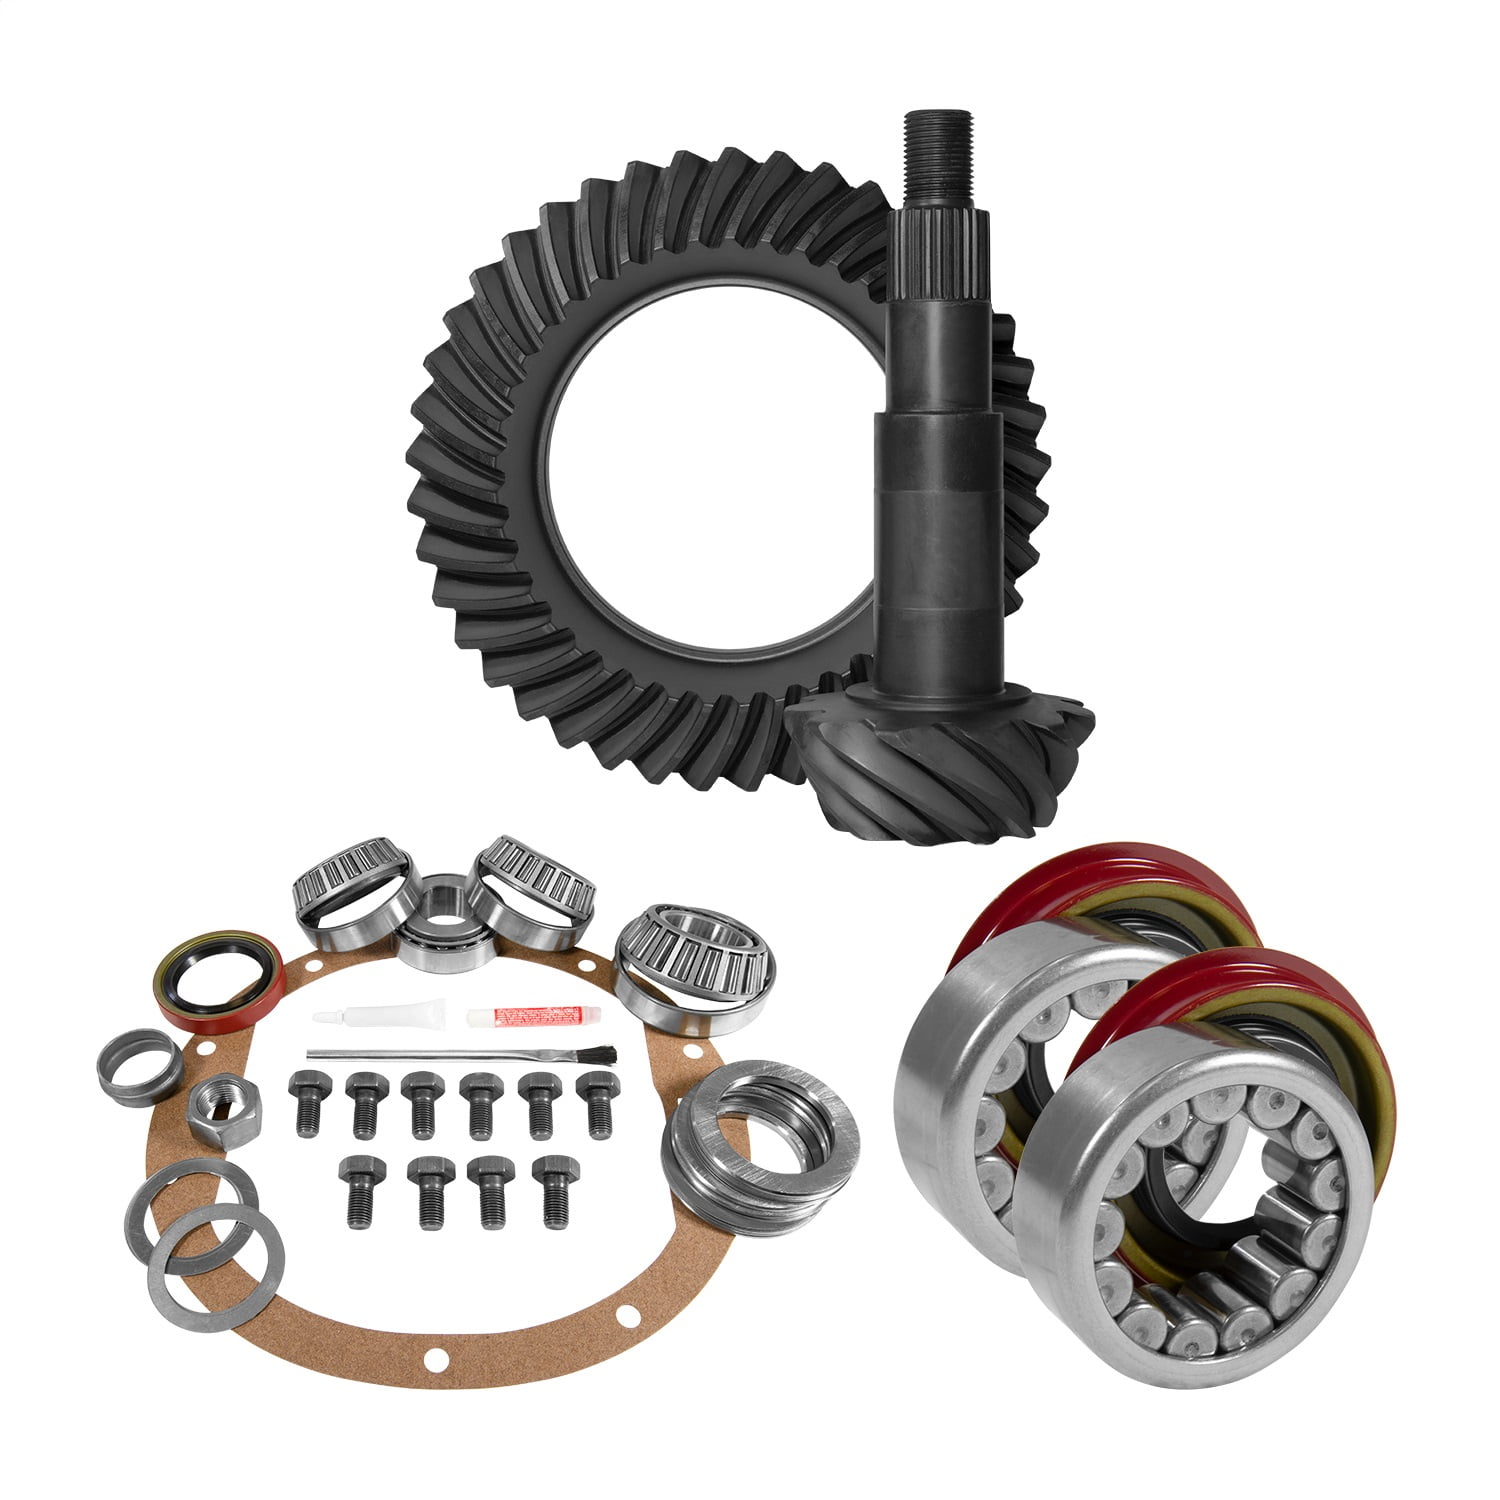 G2 Axle and Gear 35-2152 Ring And Pinion Master Install Kit Dana 44 M220 Master Install Ring And Pinion Master Install Kit 